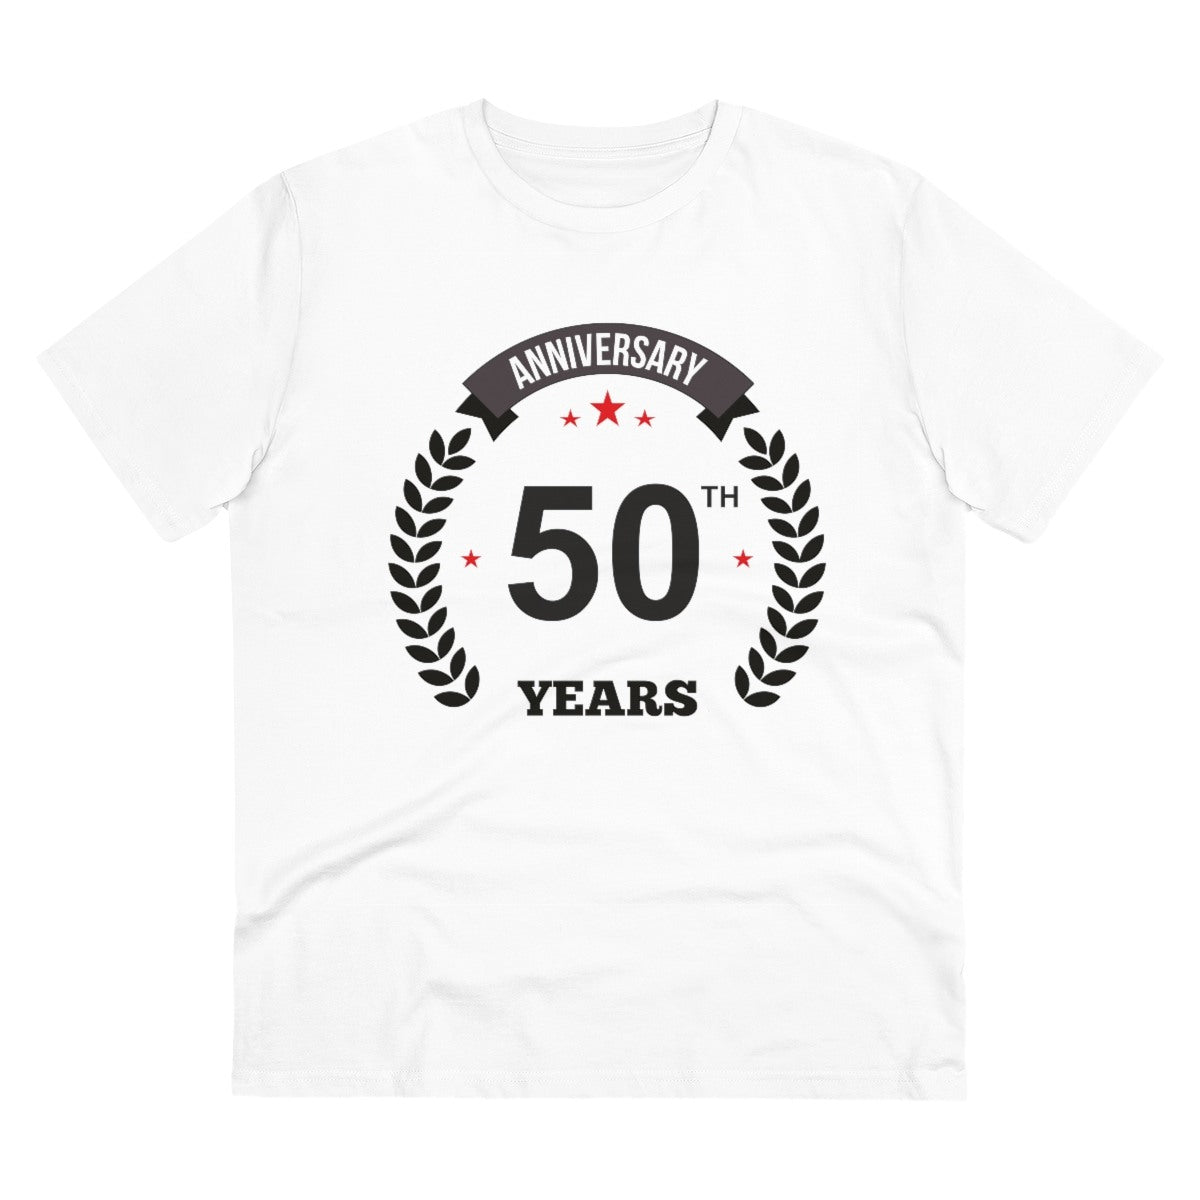 Men's PC Cotton 50th Anniversary Printed T Shirt (Color: White, Thread Count: 180GSM) - GillKart